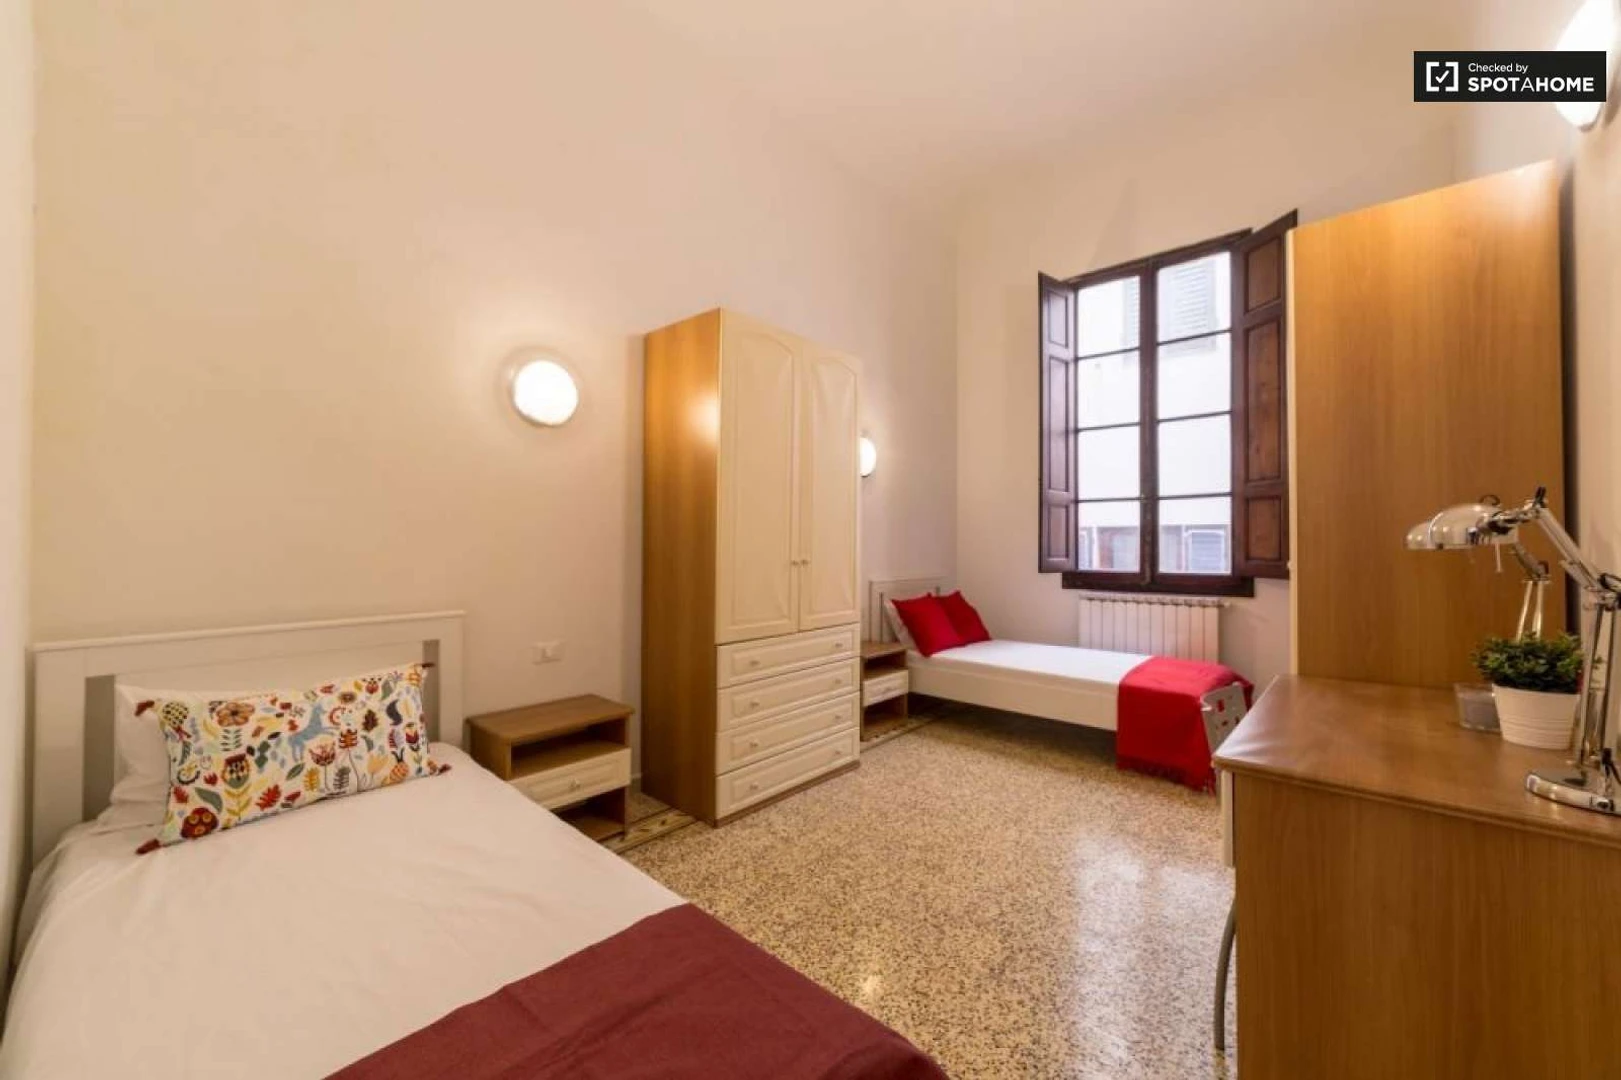 Room for rent with double bed firenze